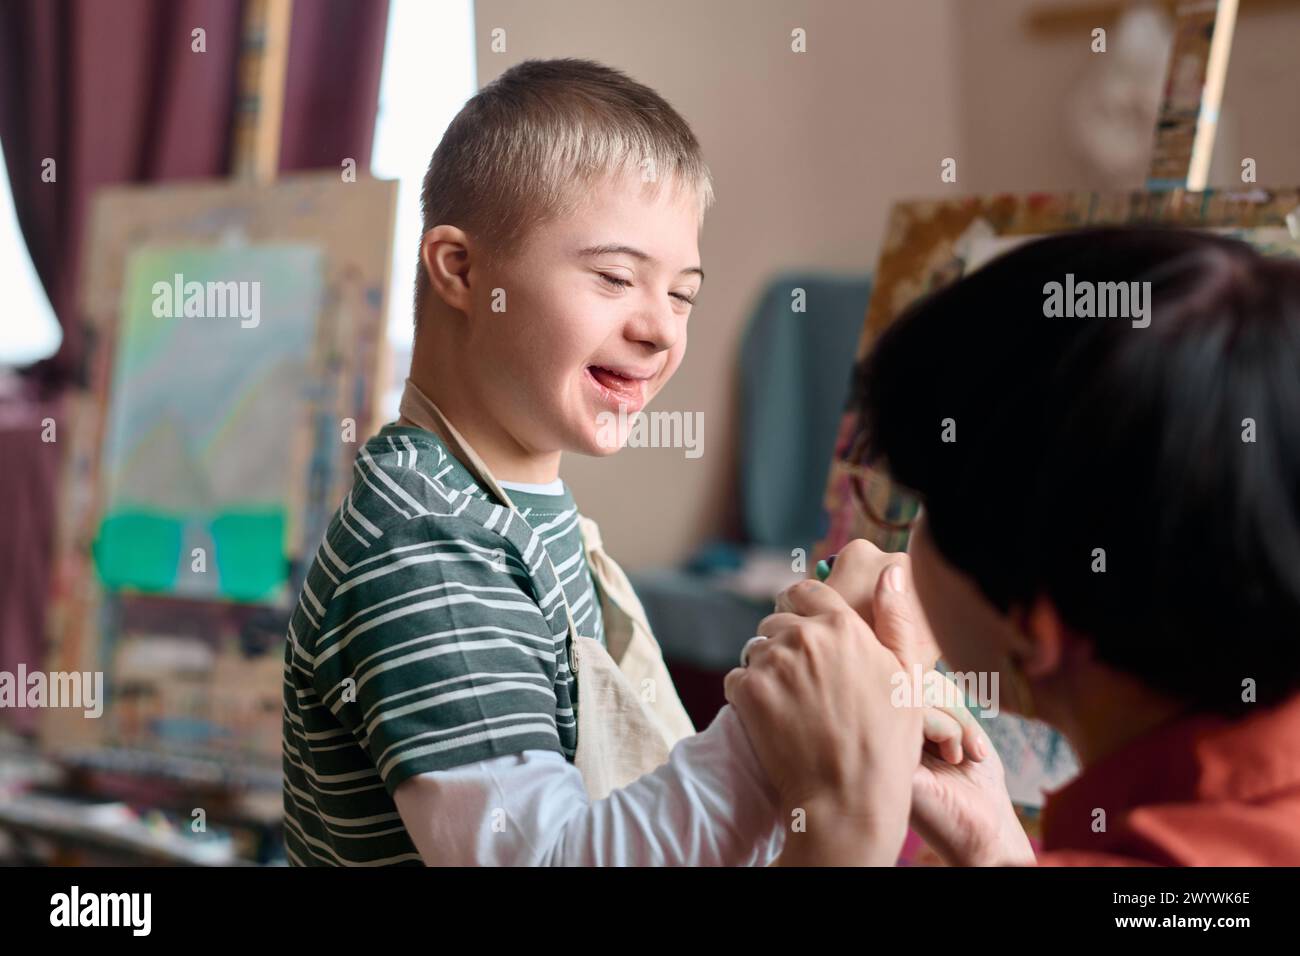 Portrait of young boy with Down syndrome laughing cheerfully enjoying art class with parent or teacher assistant Stock Photo